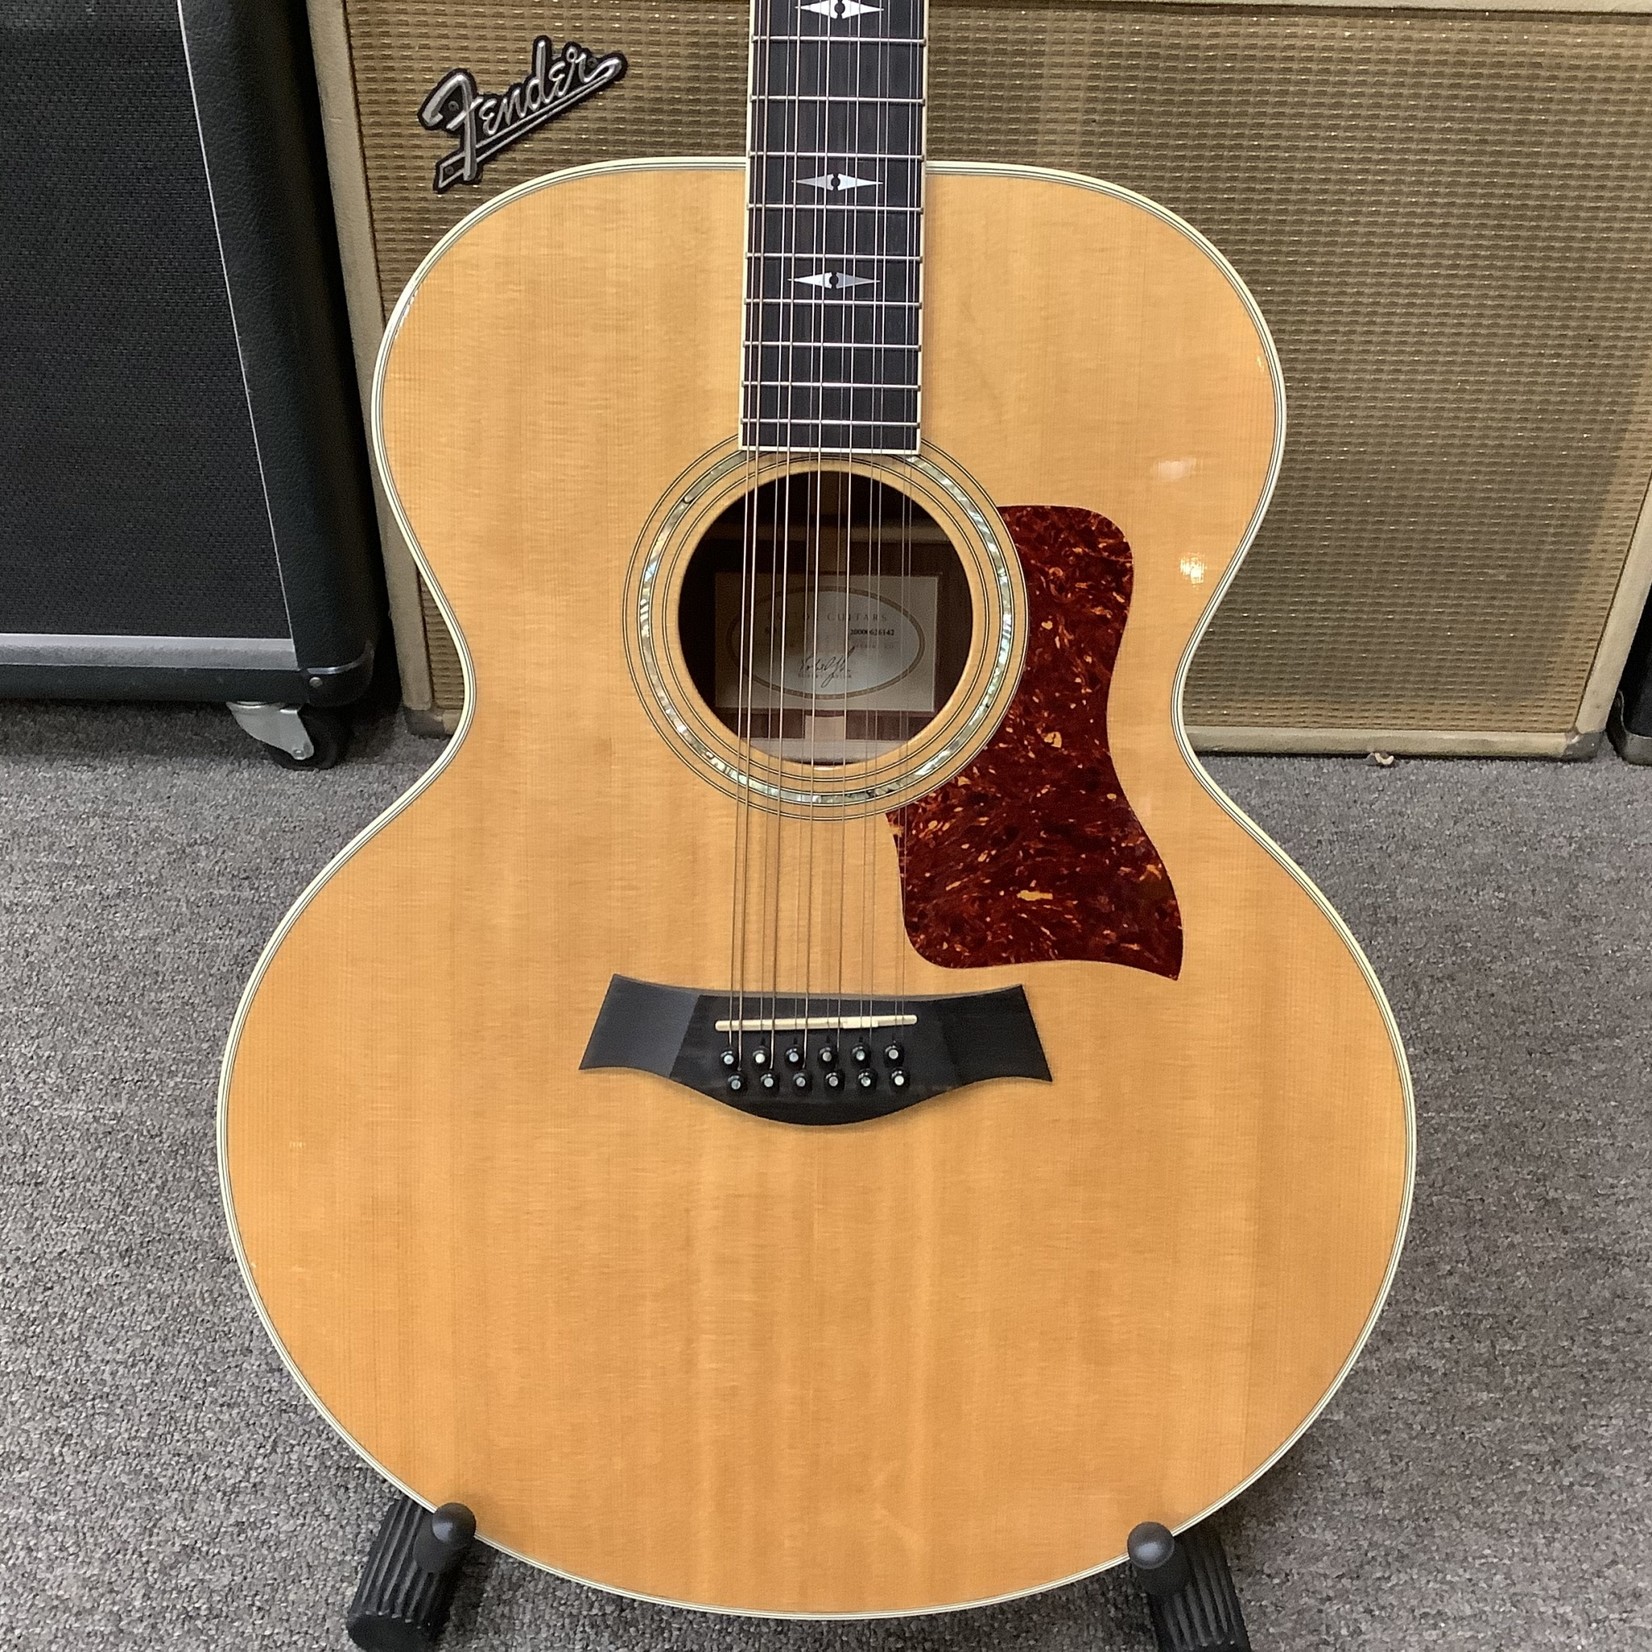 Taylor 2000 Taylor 855 12 String Electric